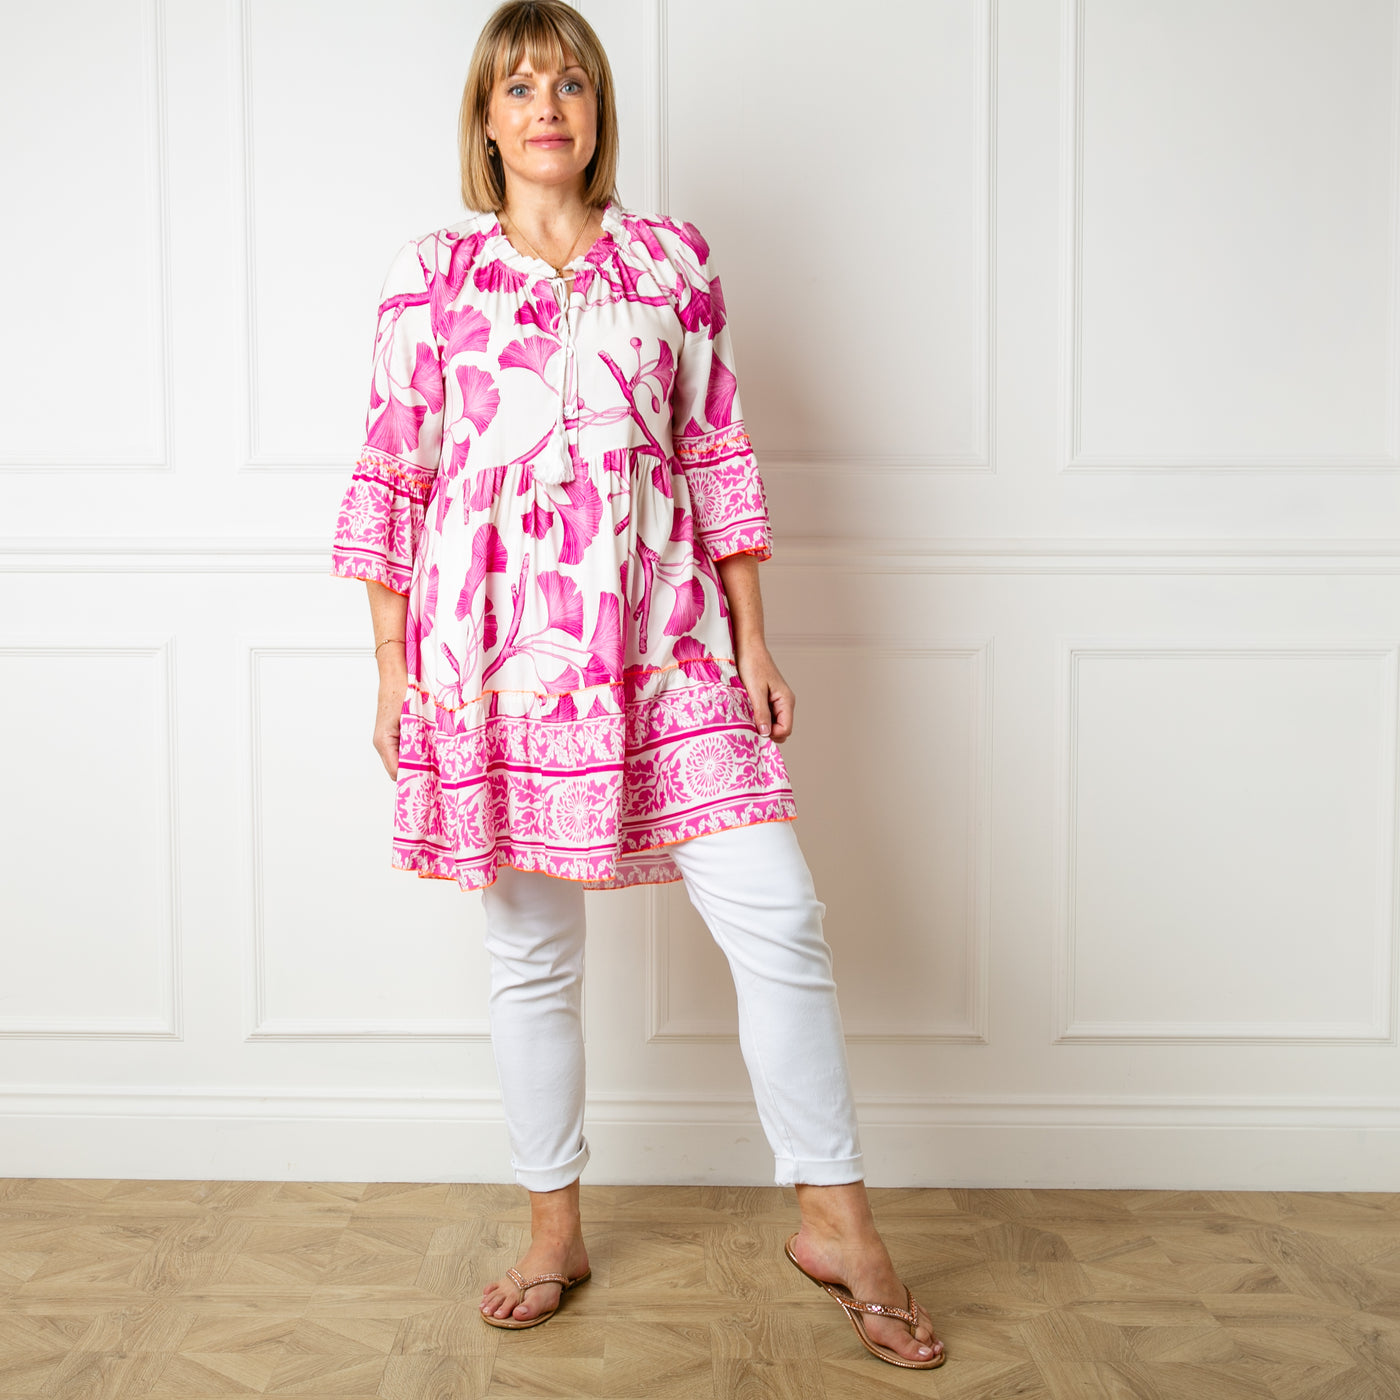 The pink Florence Drawstring Dress which has a tiered skirt and falls just above the knee. Can be worn on its own or with trousers underneath for a tunic look